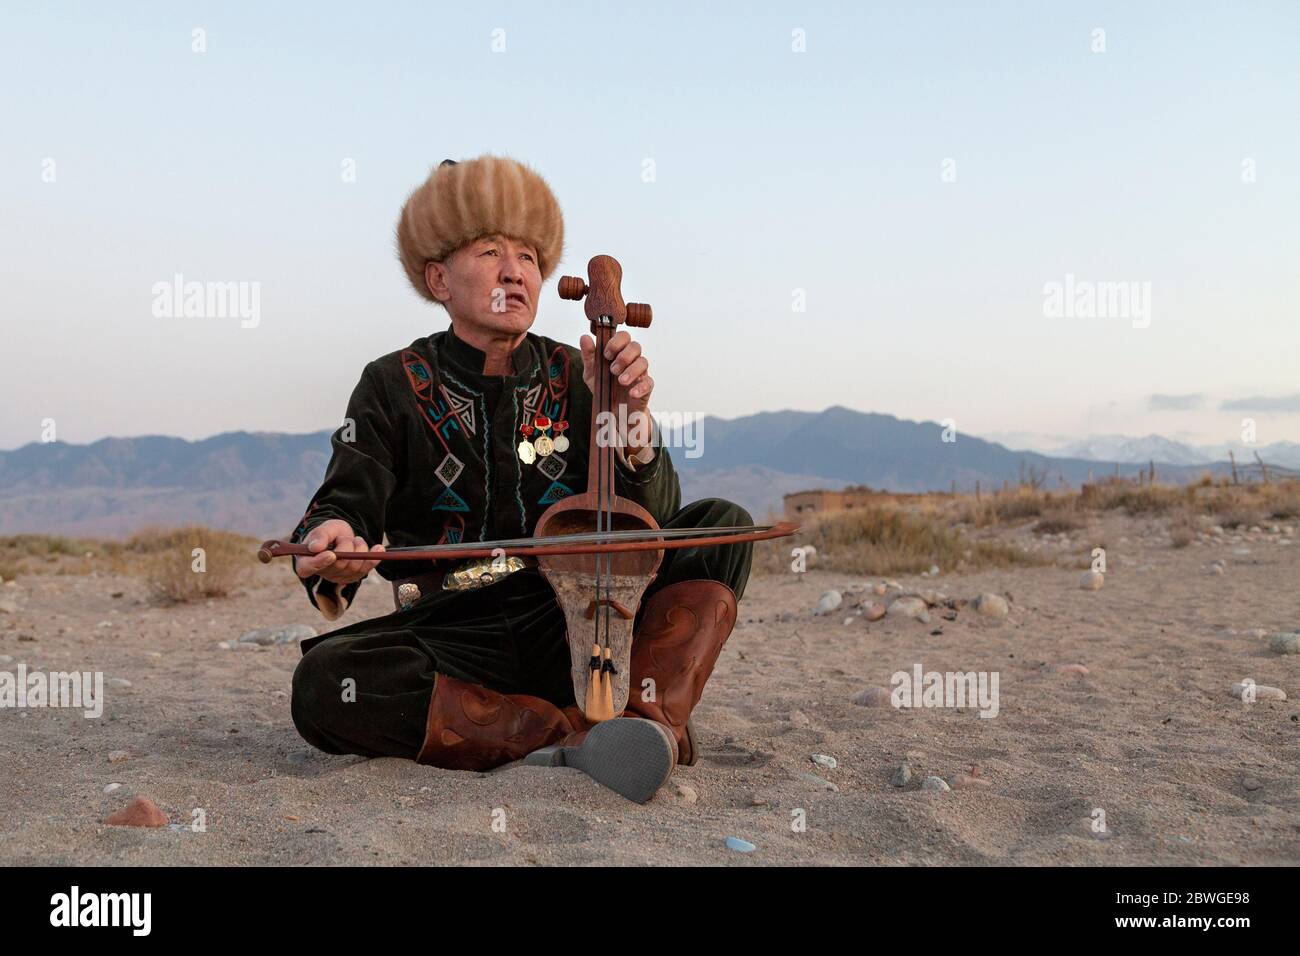 Kyrgyz musician playing traditional musical instrument known as Komuz, in Issyk Kul, Kyrgyzstan Stock Photo